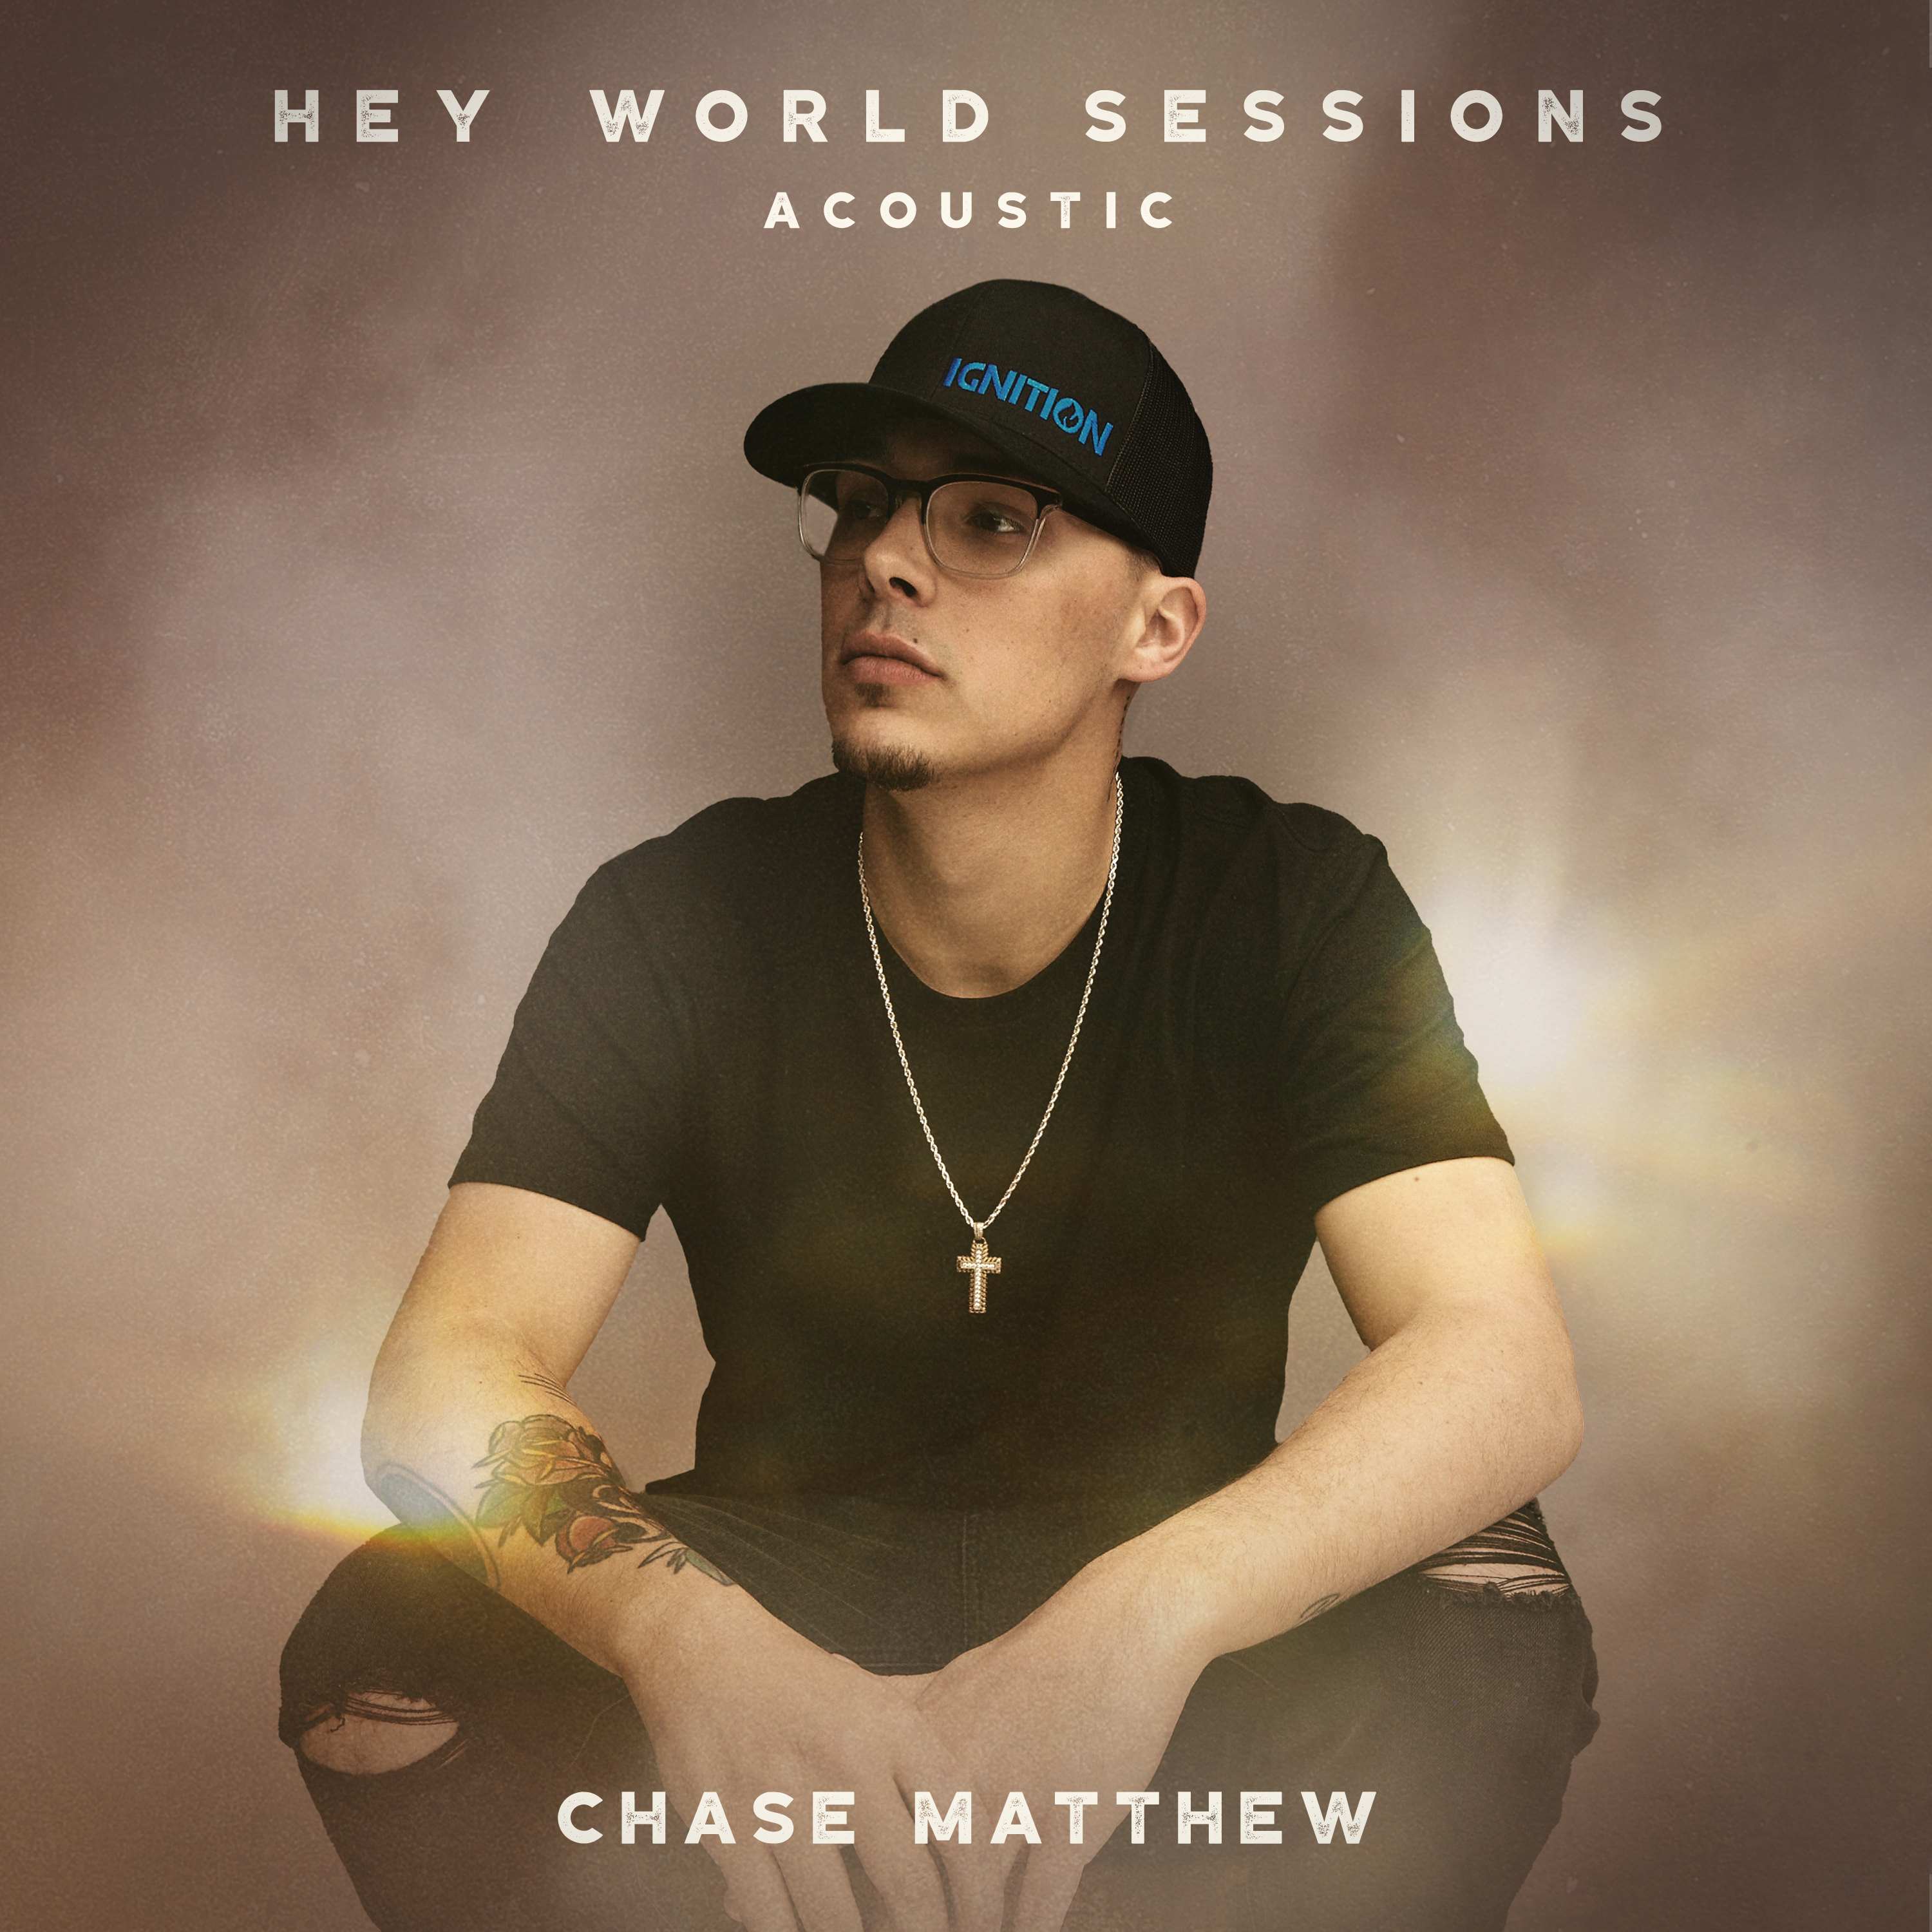 HEY WORLD SESSIONS